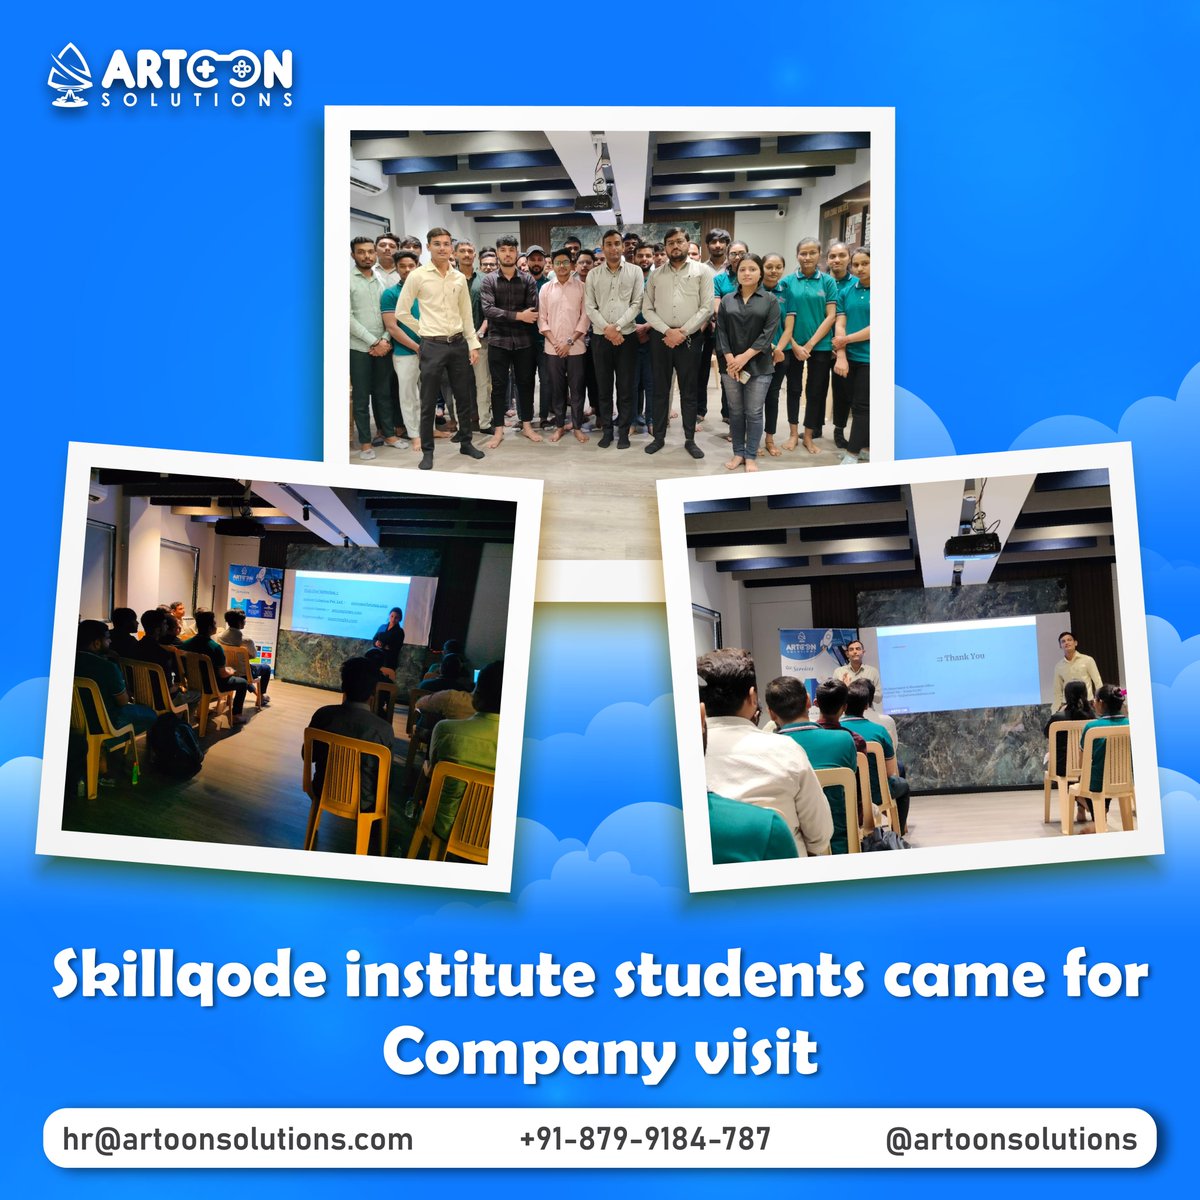 Excited to welcome SkillQode Institute students for an office visit! 

#institute #visit #knowledgeexchange #innovation #futureInnovators #studentsupport #officevisit #visit #itcompany #artoonsolutions